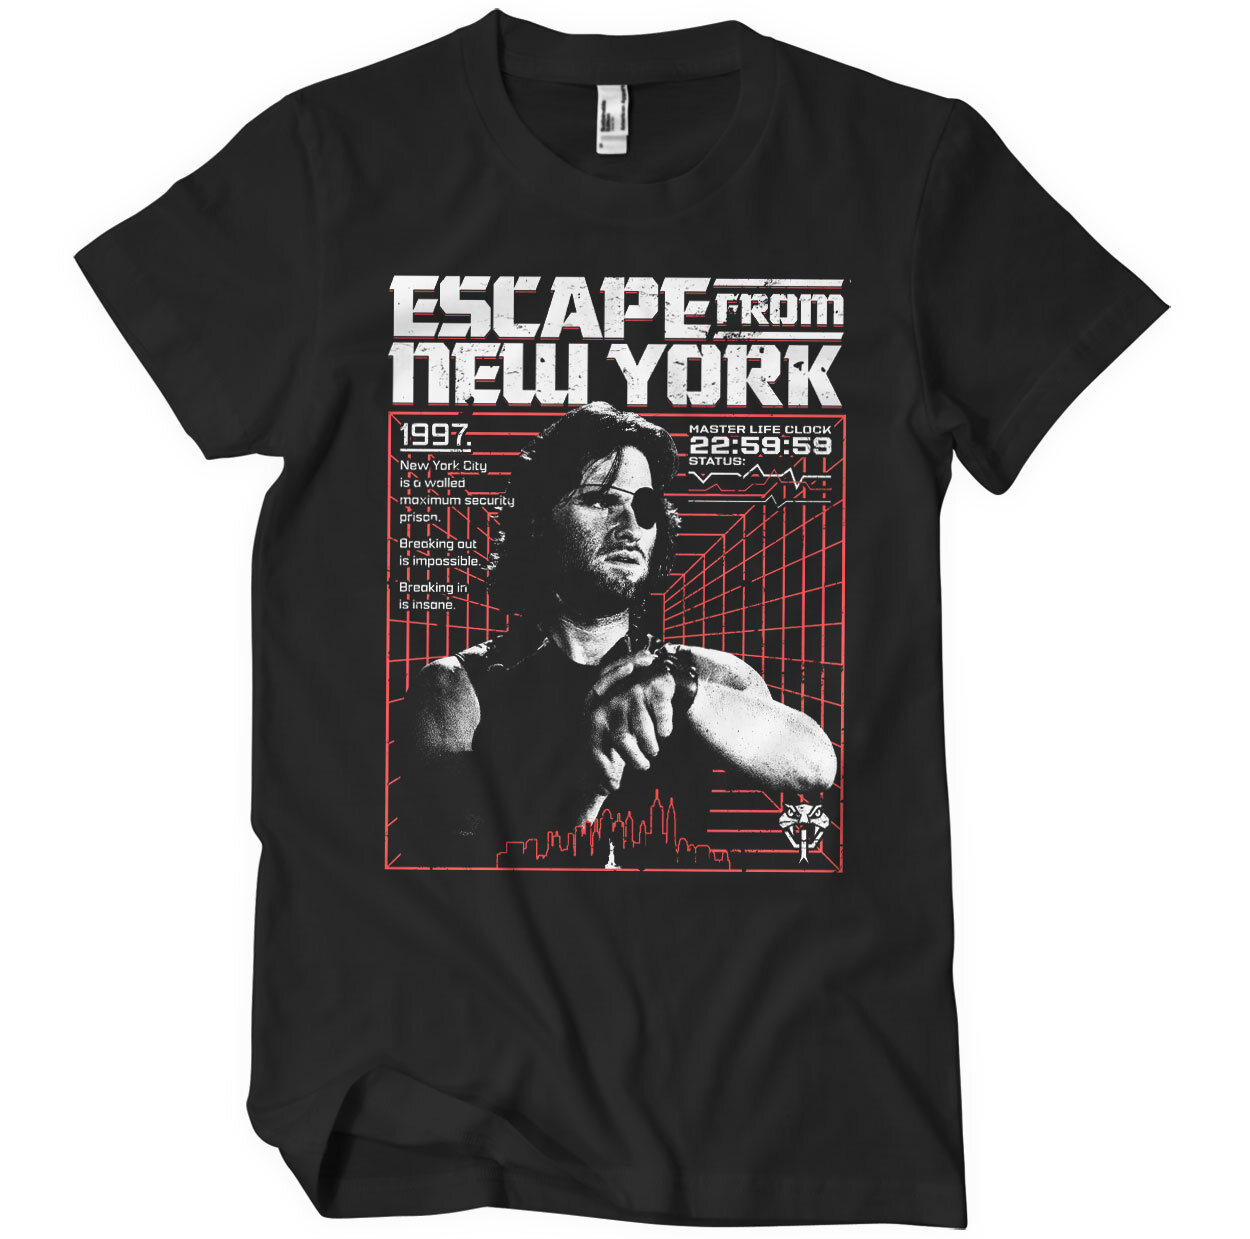 Escape From N.Y. 1997 T-Shirt